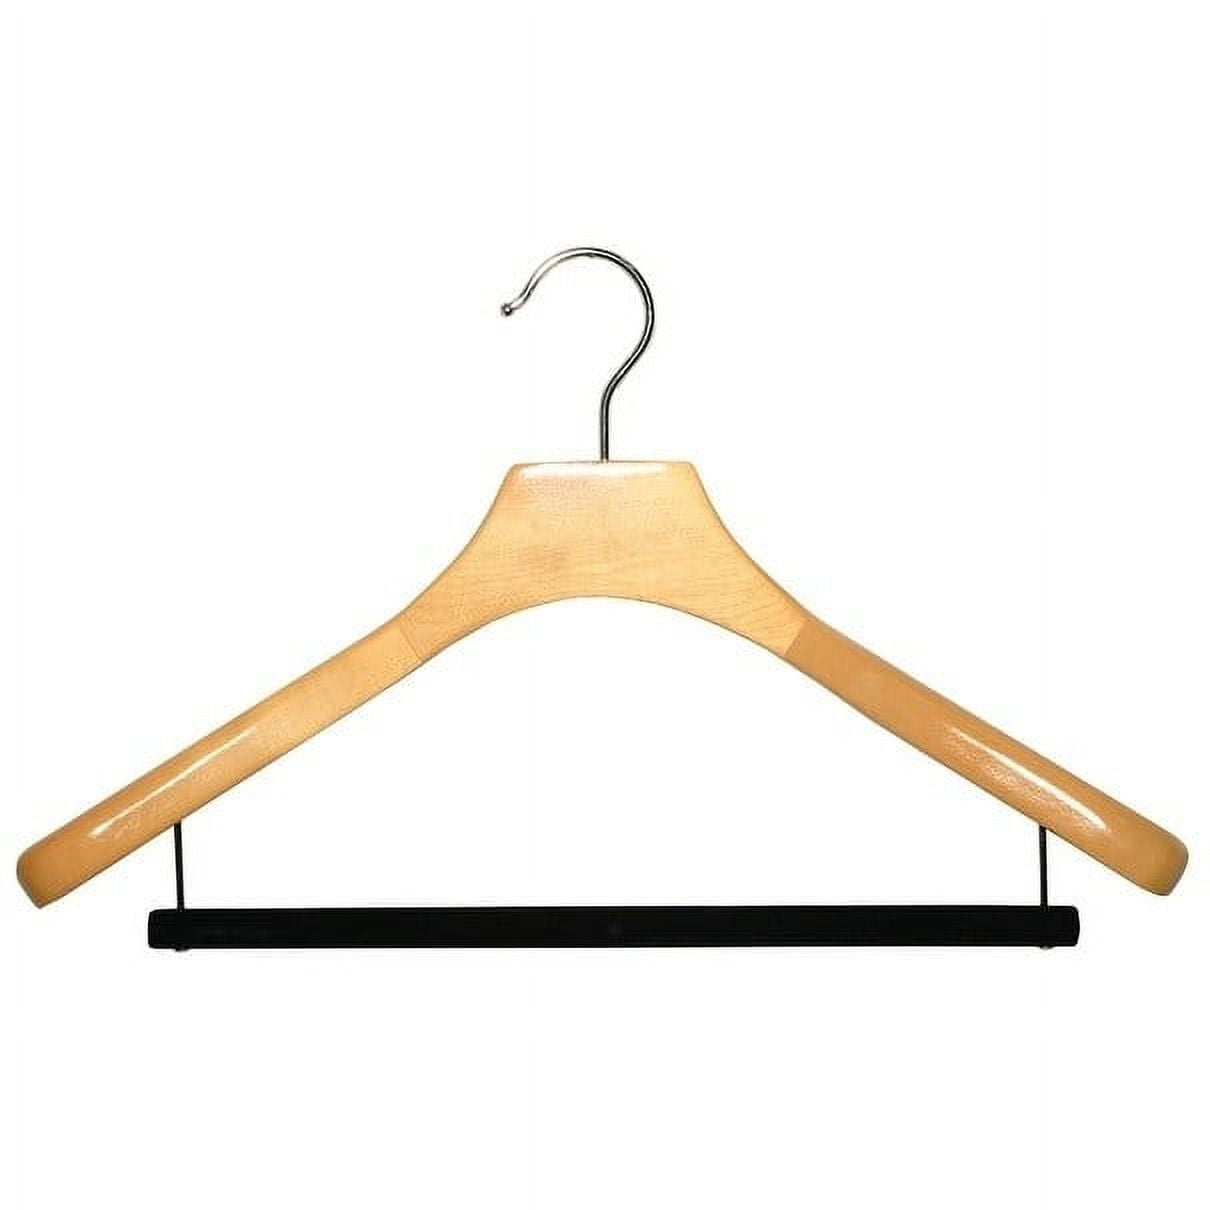 6 luxury hangers for jacket and suit in ash wood - black - brushed